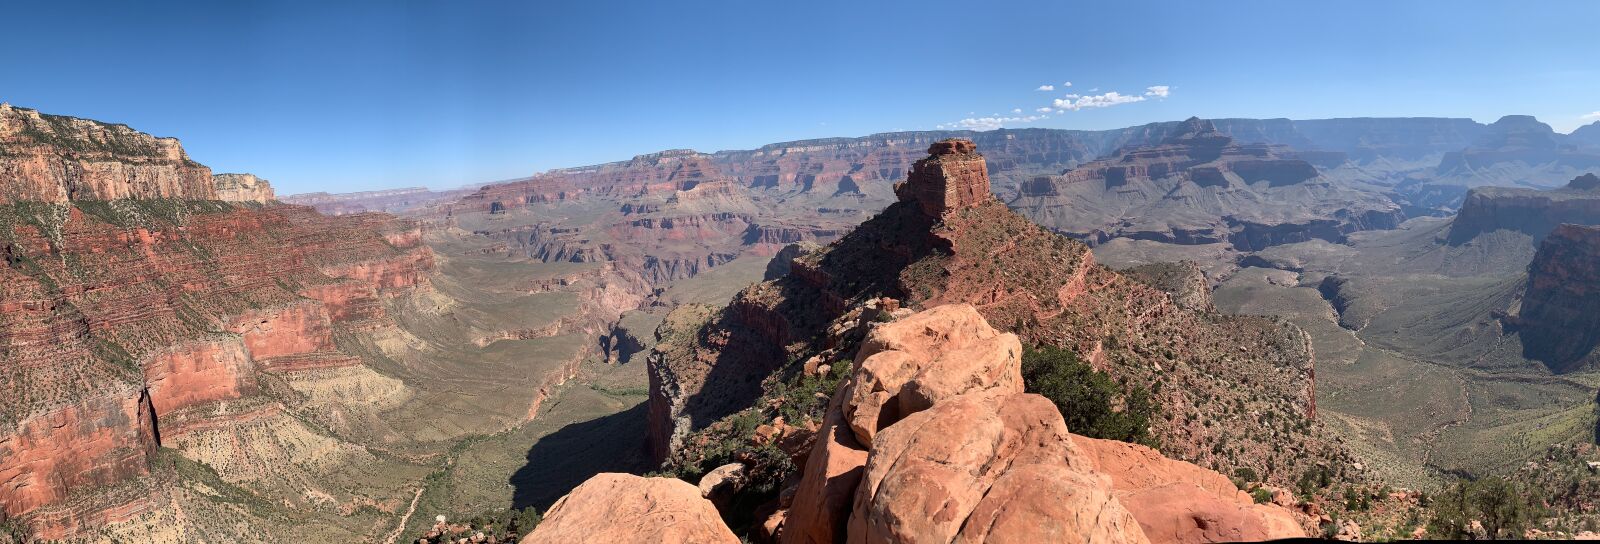 Apple iPhone XS Max + iPhone XS Max back camera 4.25mm f/1.8 sample photo. Grand canyon, panorama, landscape photography